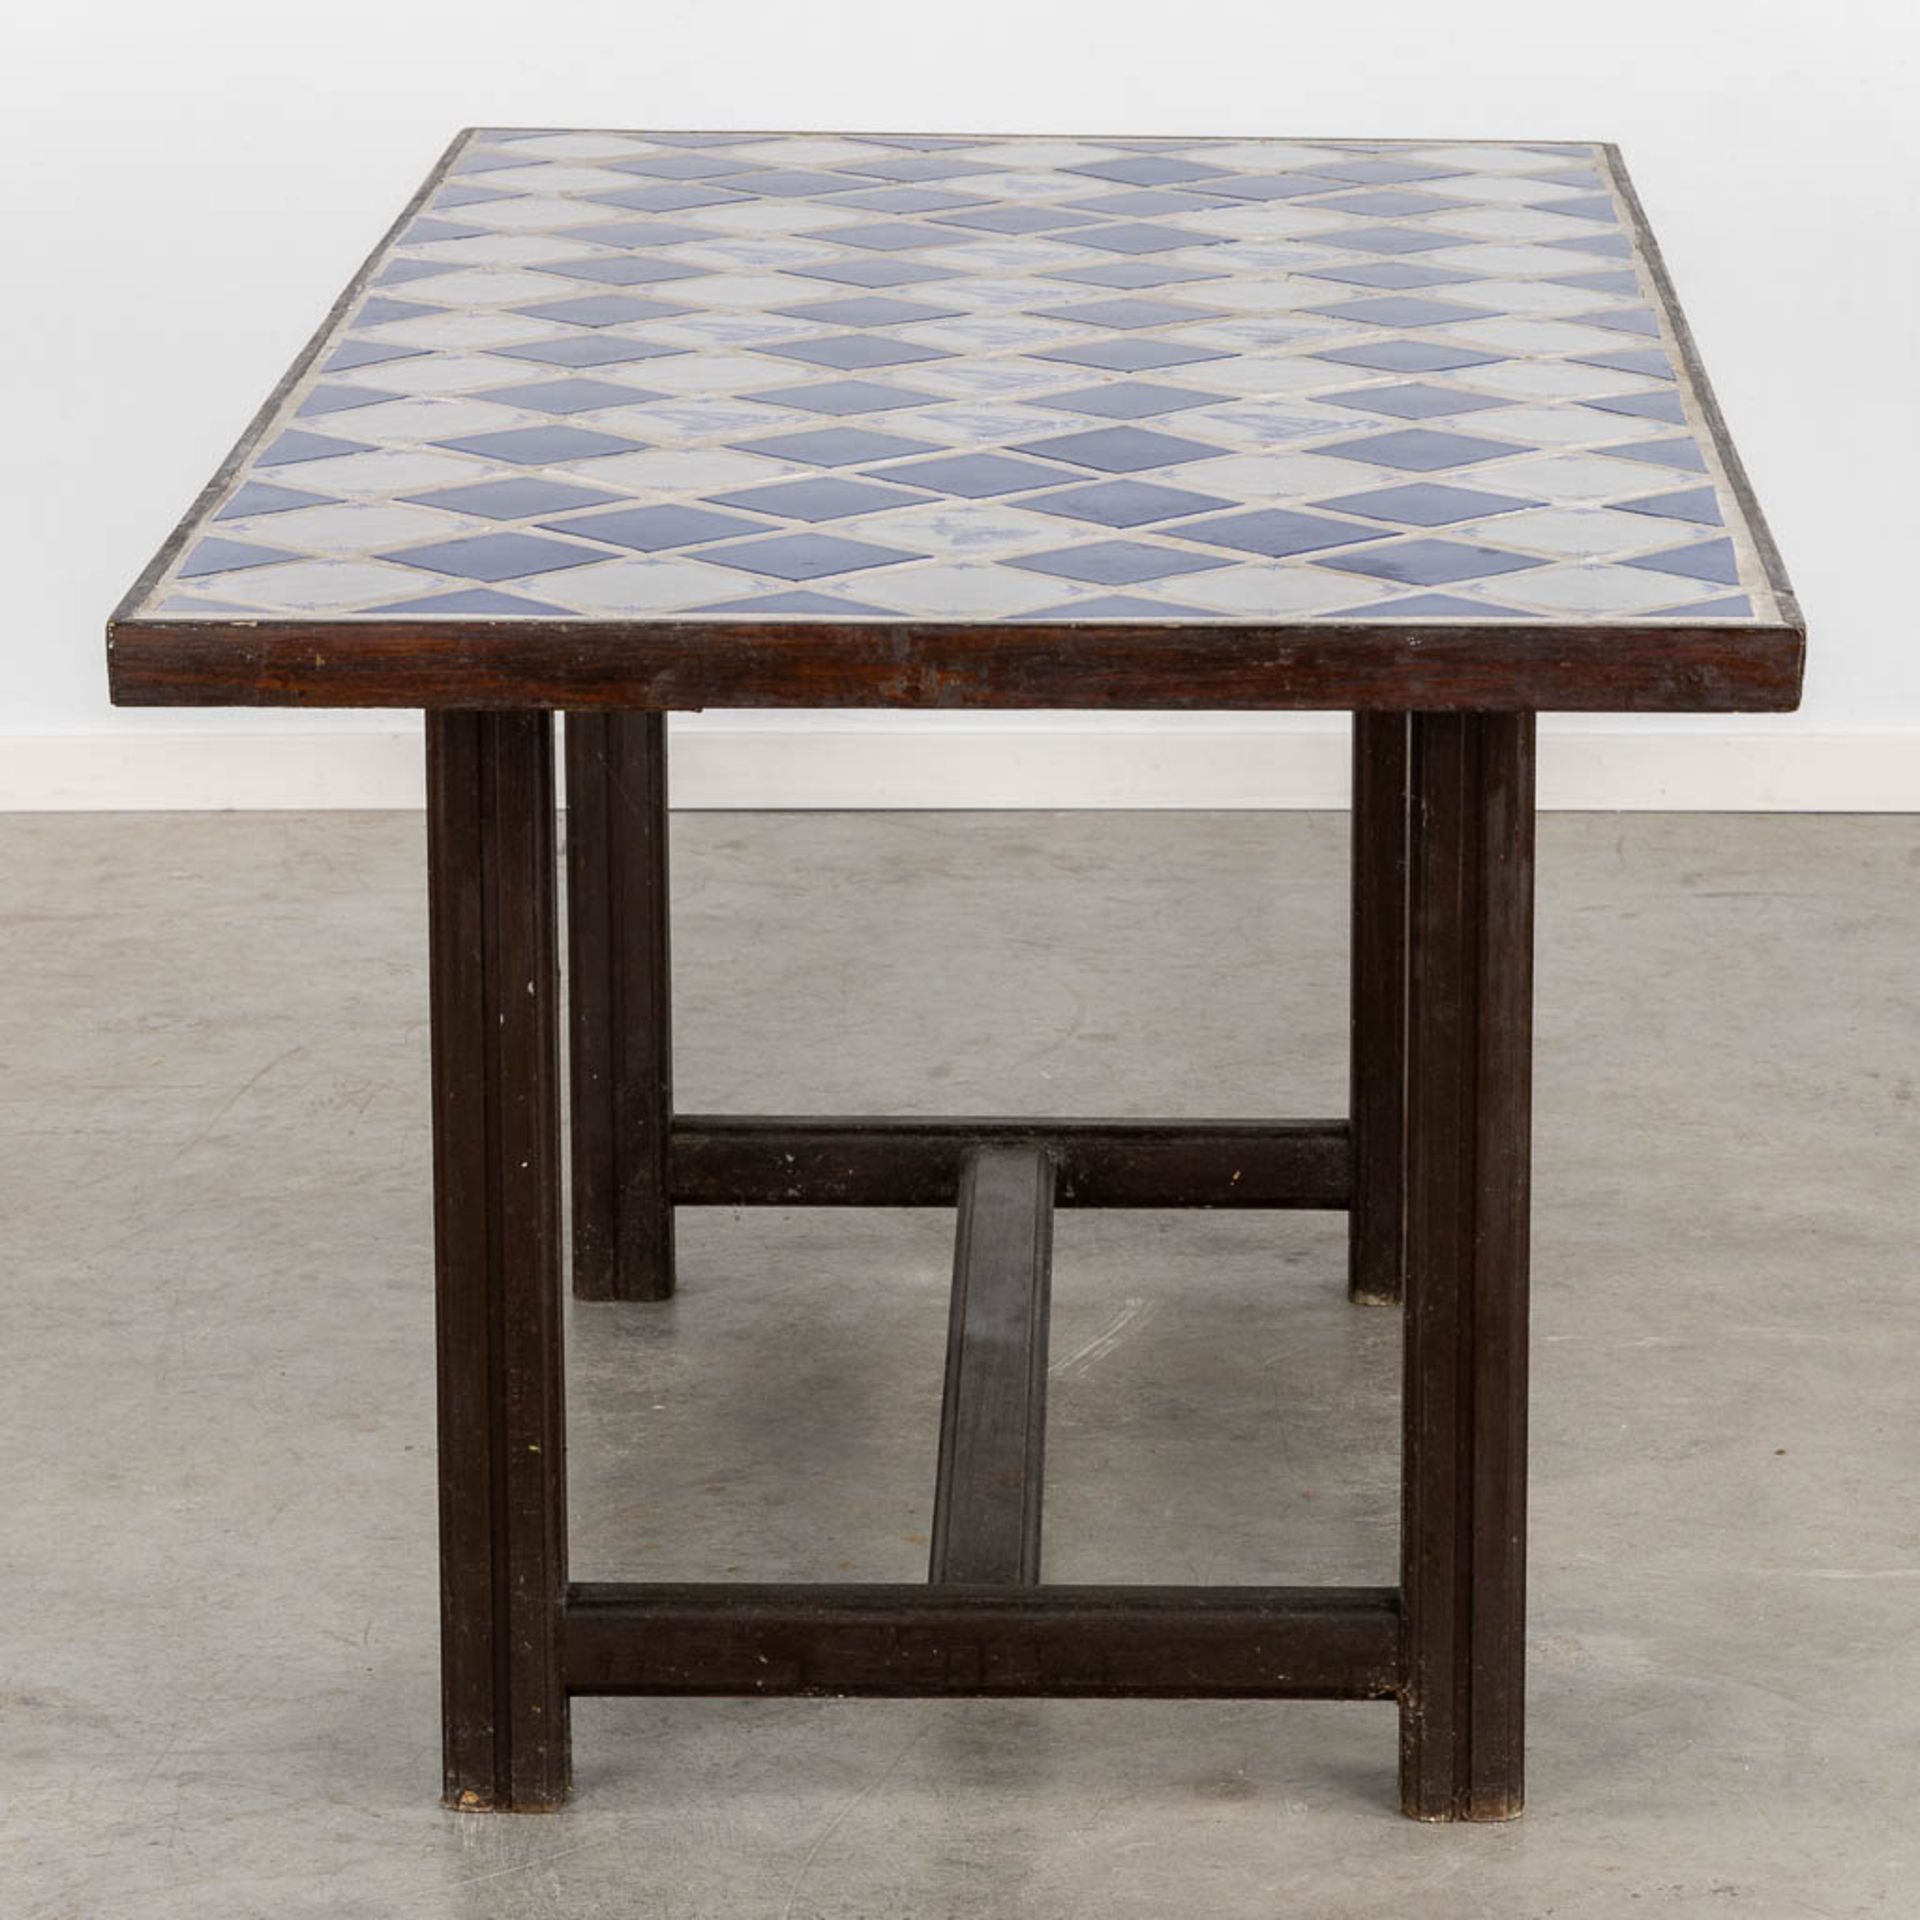 A Spanish table, finished with white and blue tiles. (L:85 x W:184 x H:76 cm) - Image 6 of 11